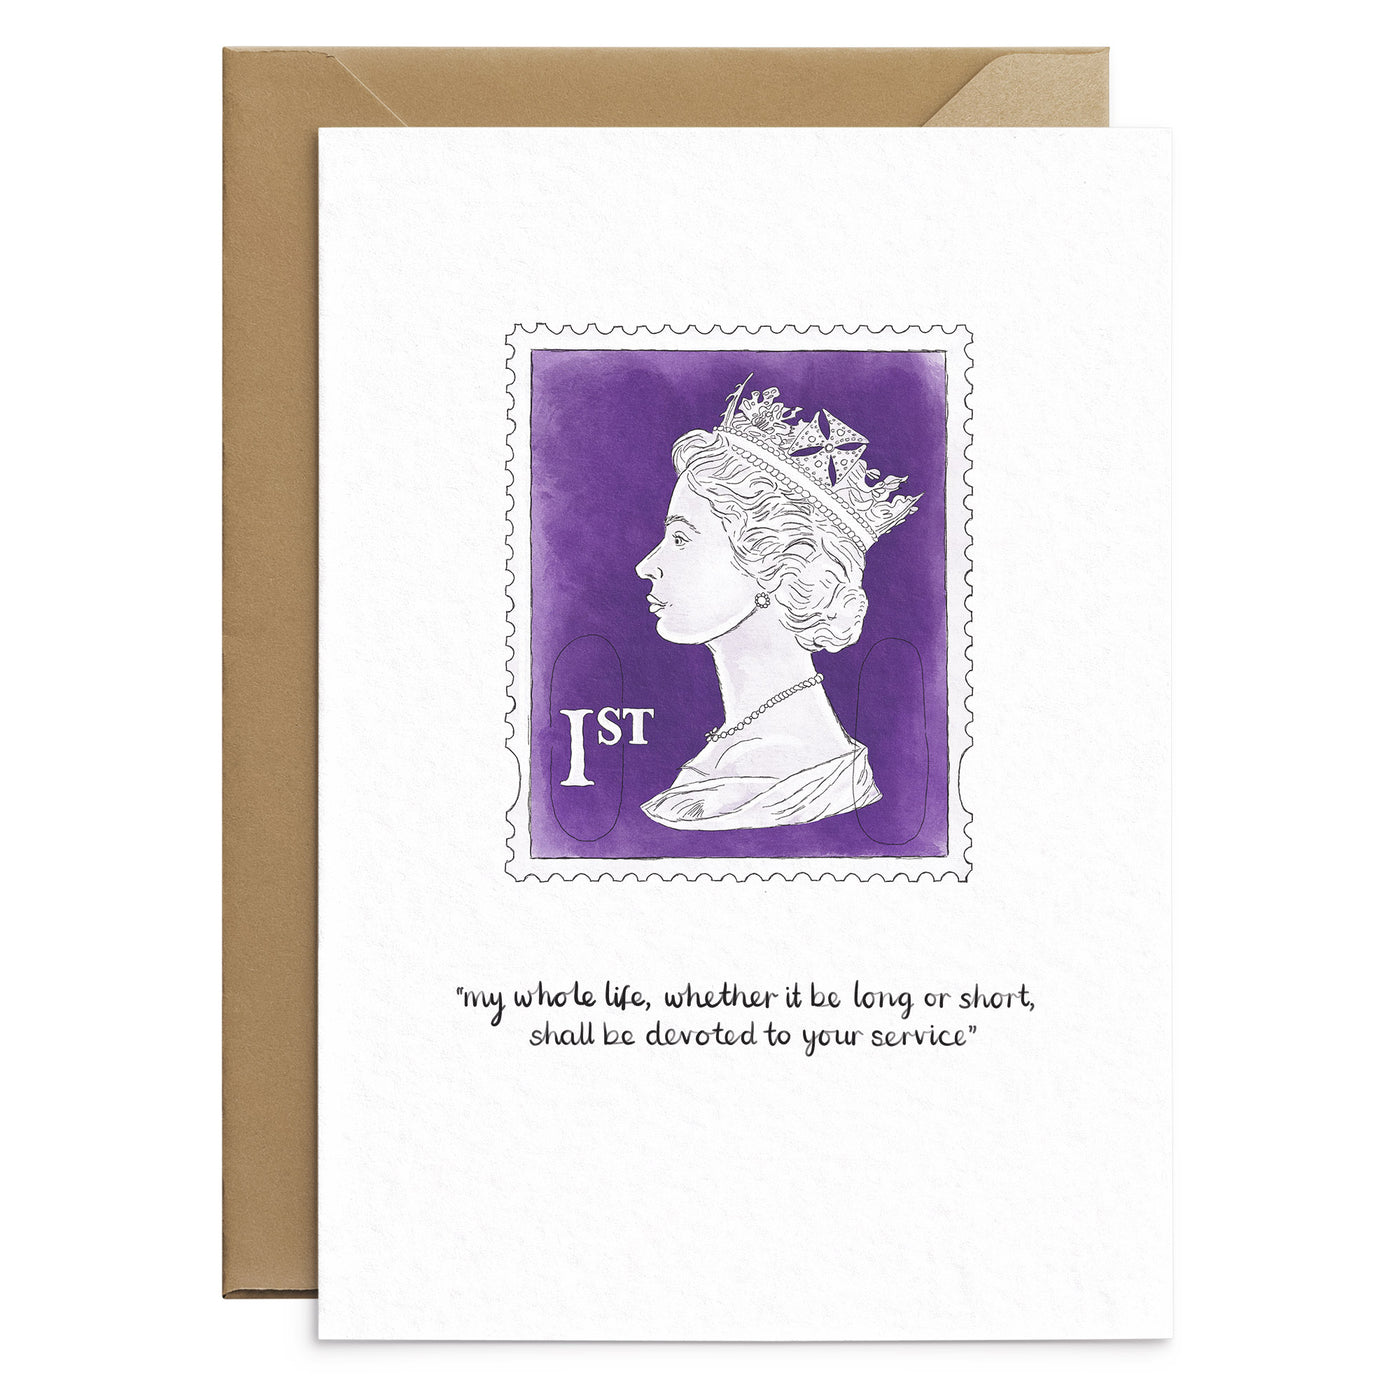 Queen-Elizabeth-Purple-Postage-Stamp-Illustrative-Greetings-Card-Poppins-and-co